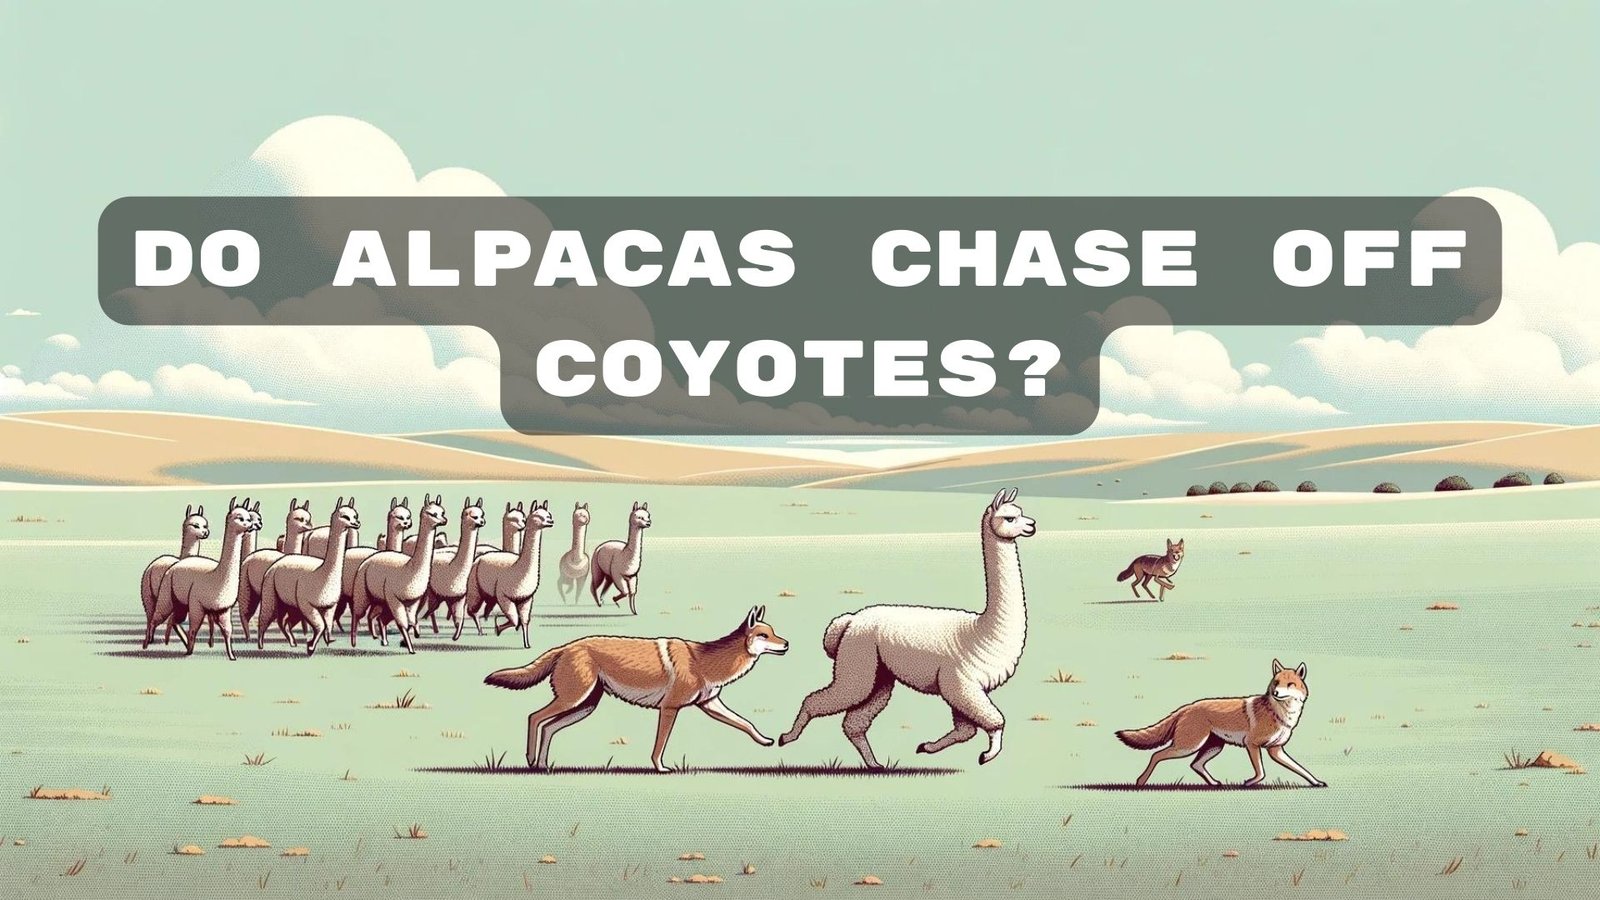 Do alpacas chase off coyotes?